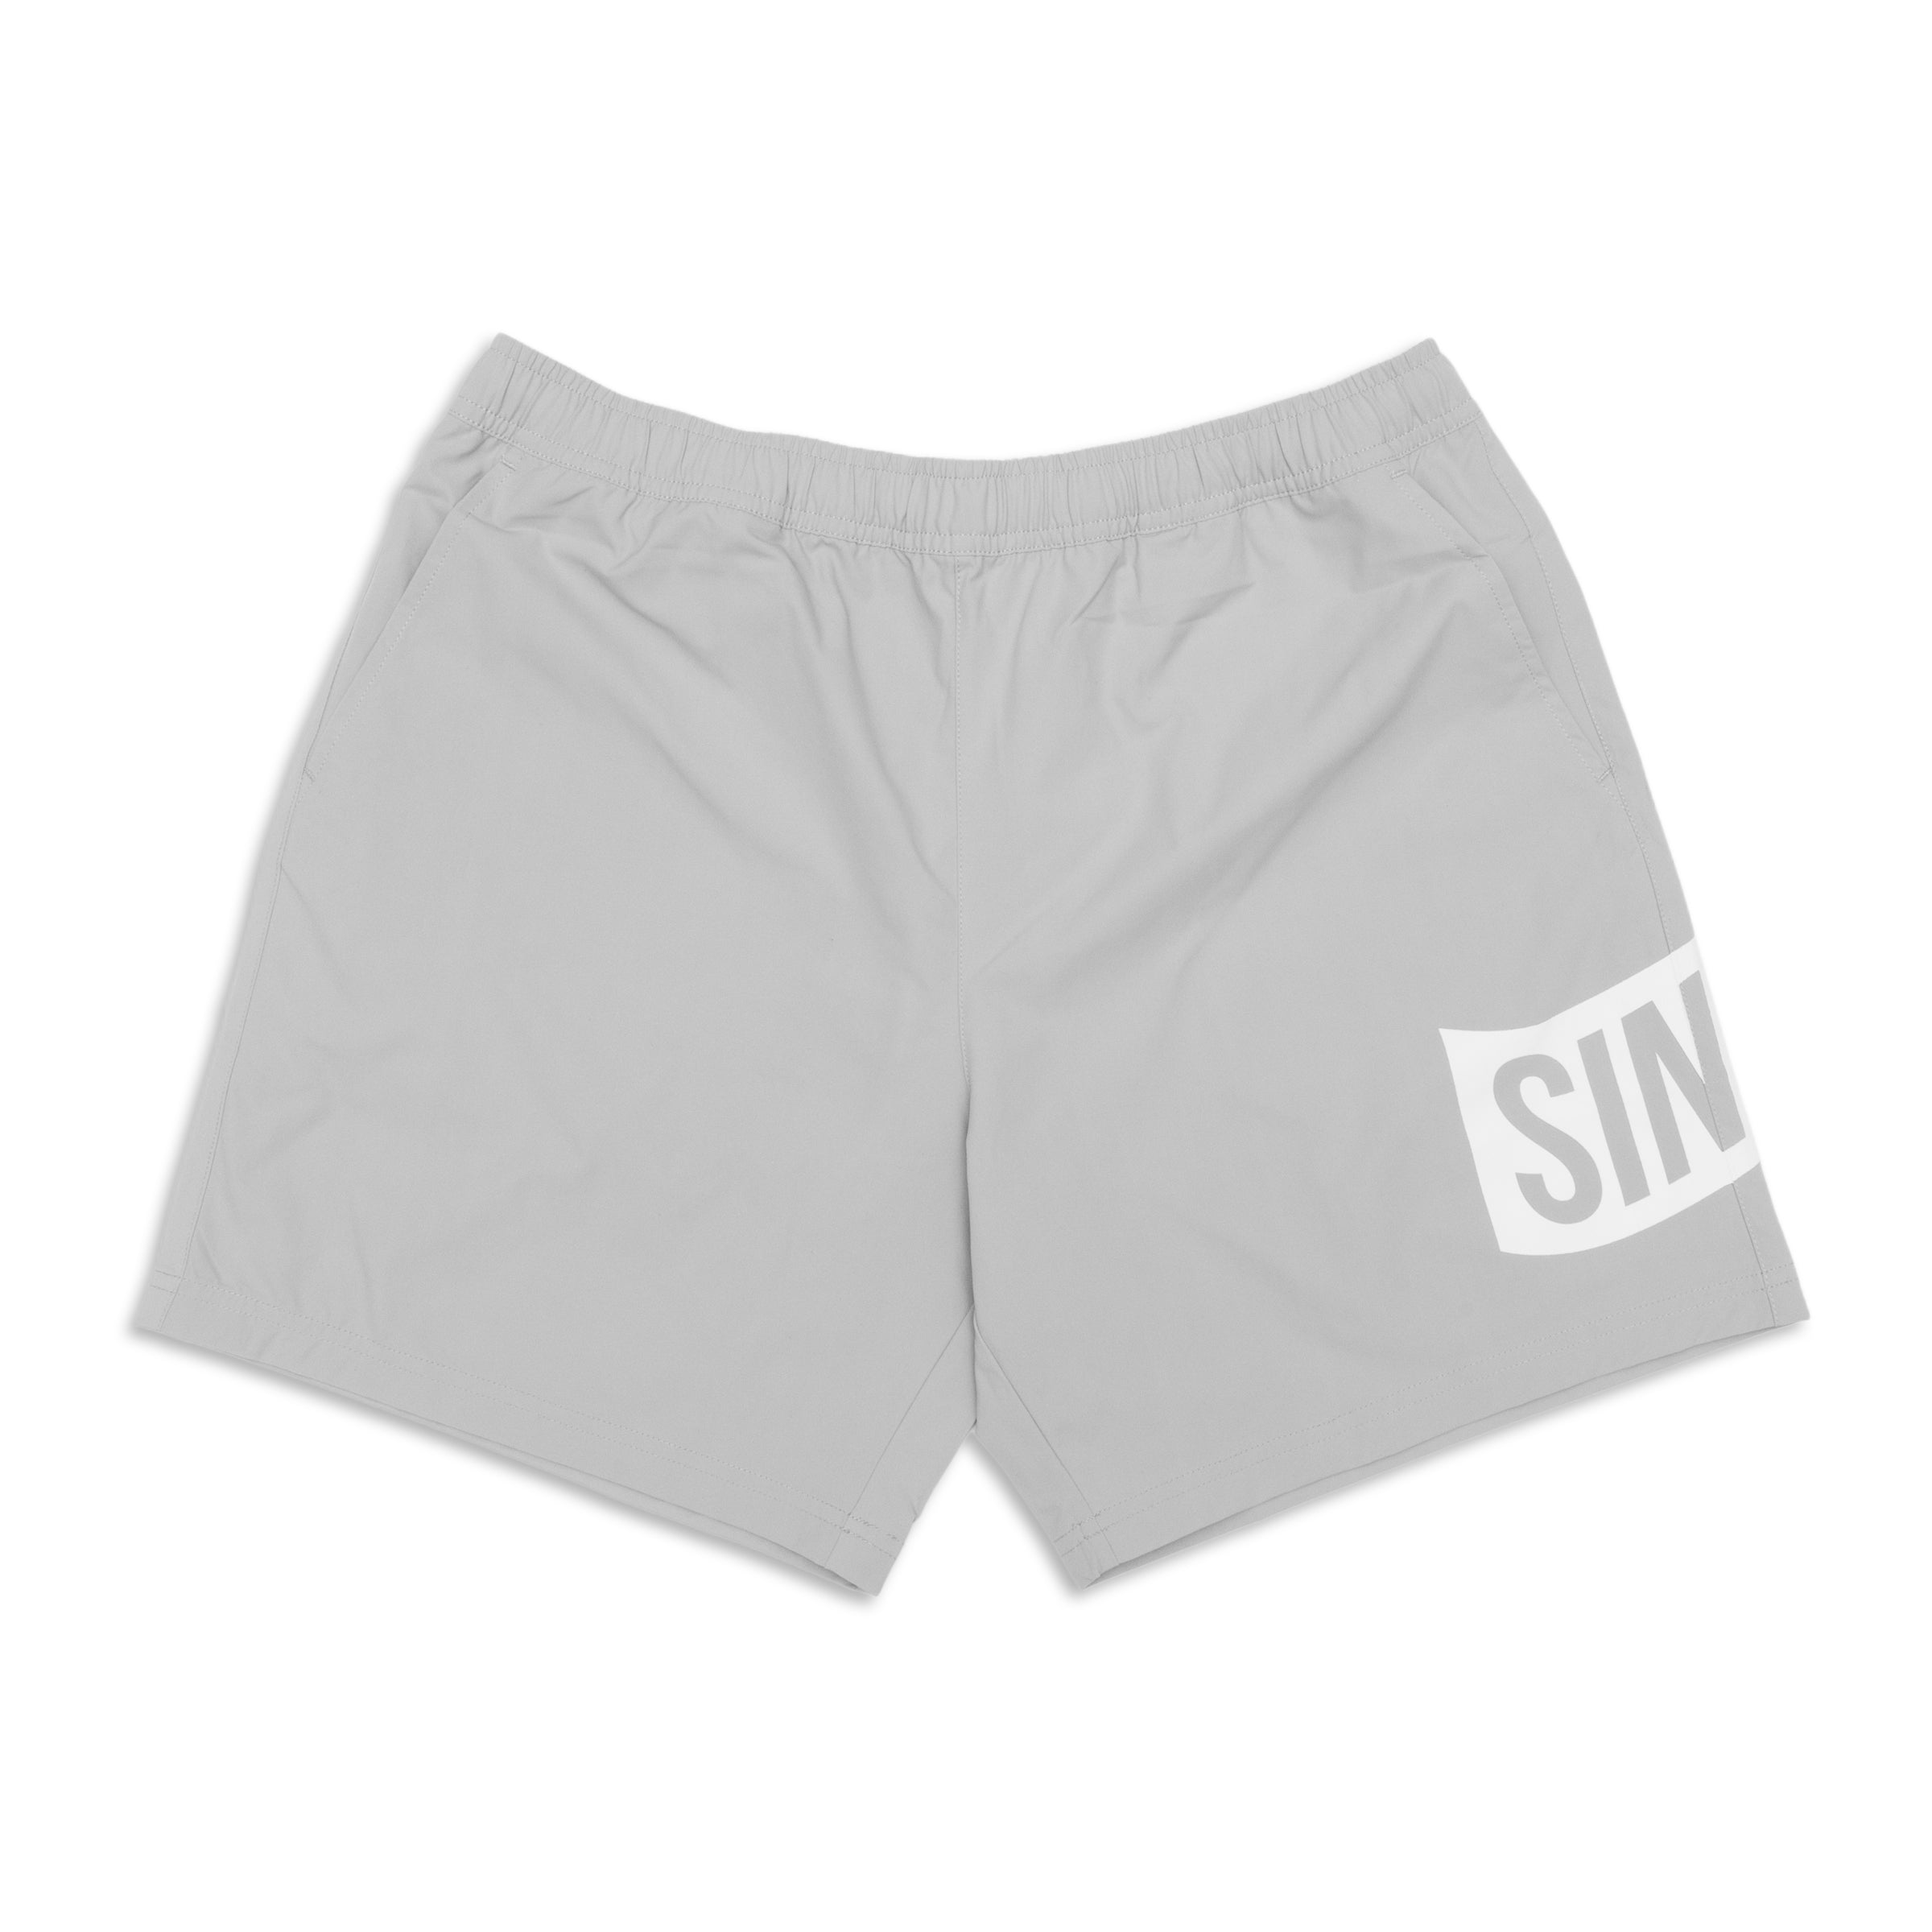 Smoke Grey Since Flag Side Print Every Day Shorts